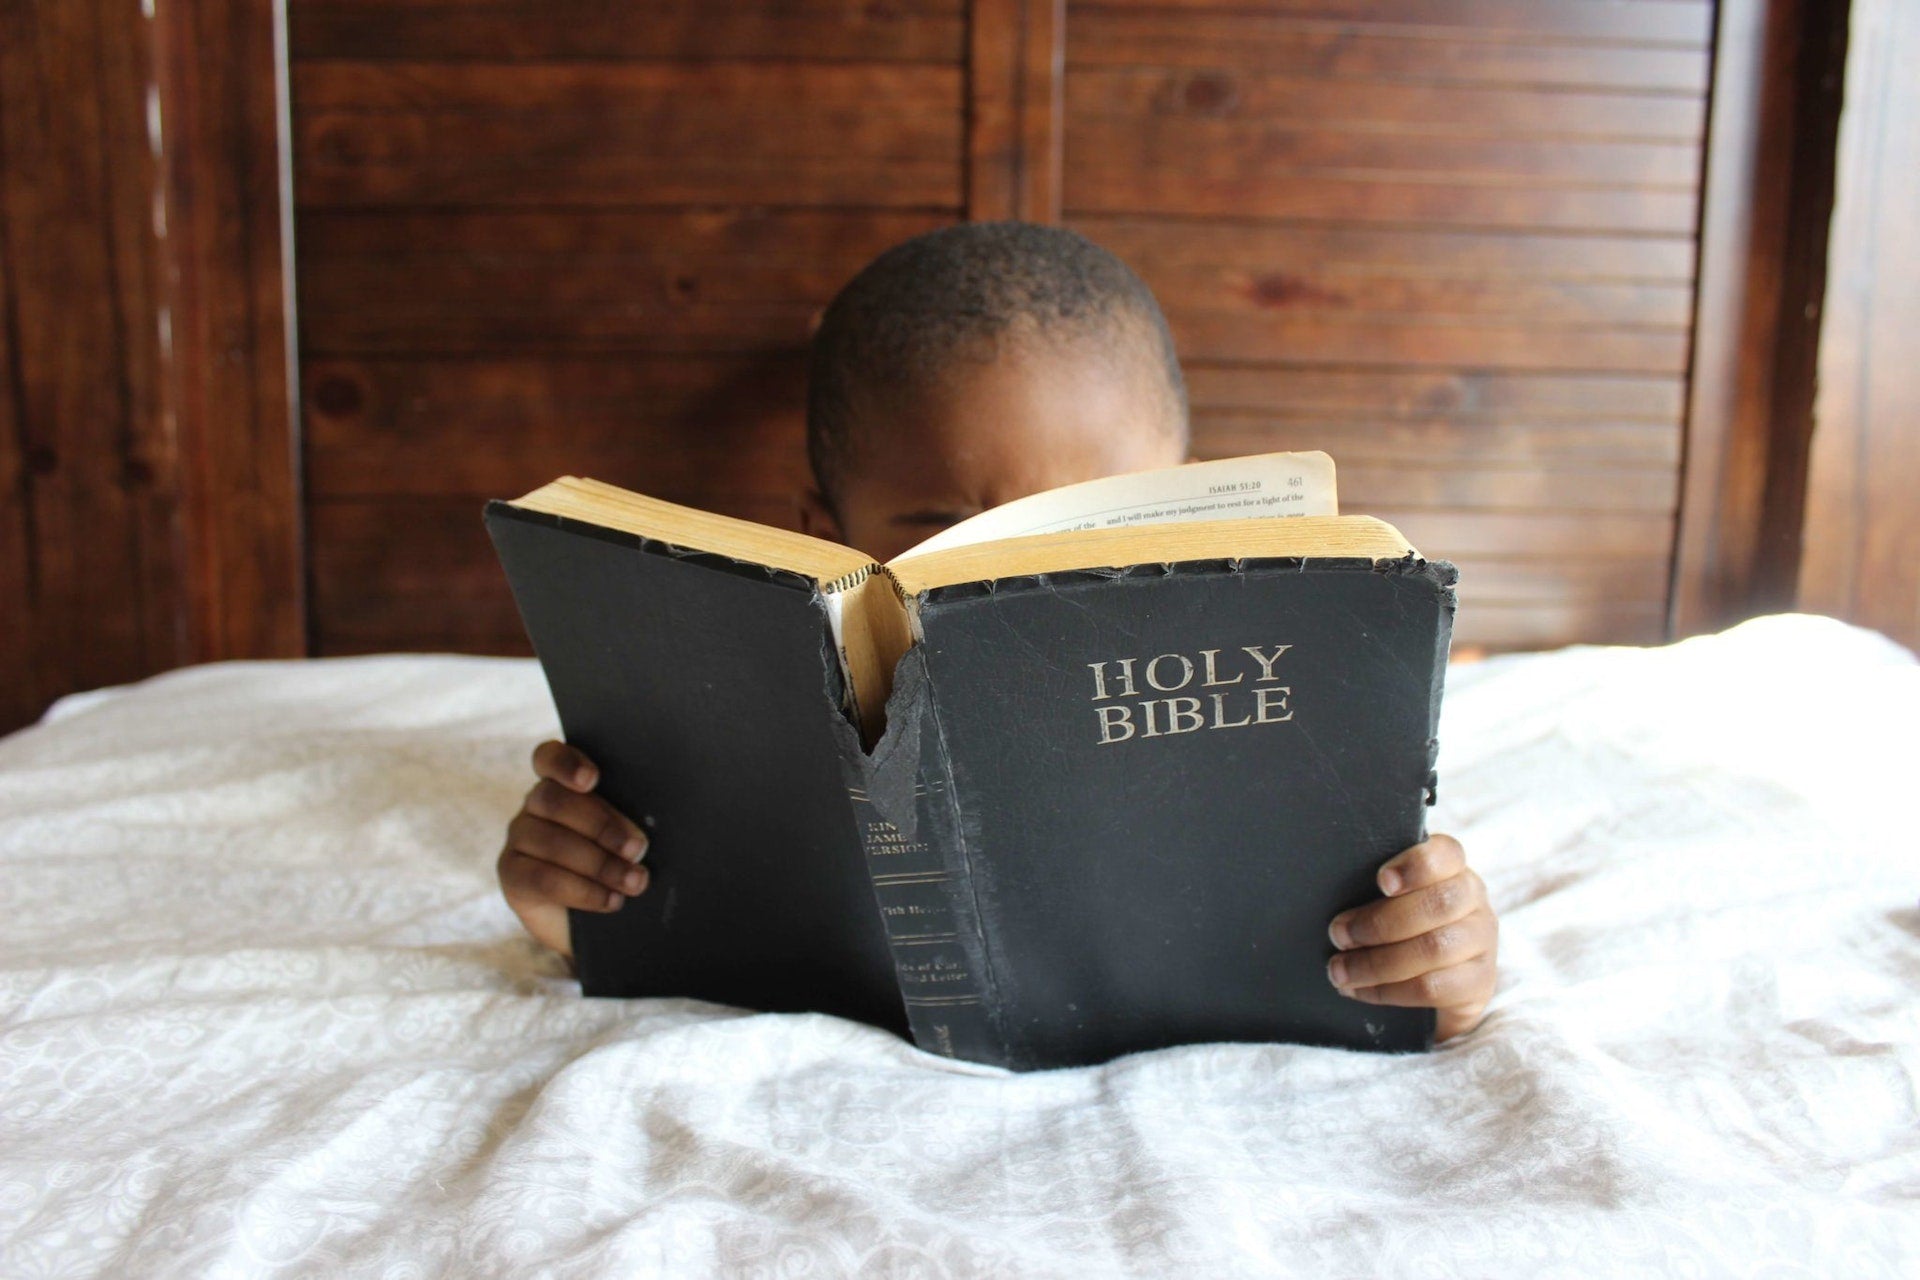 Is it Now Possible to Teach Our Children Christian Values?